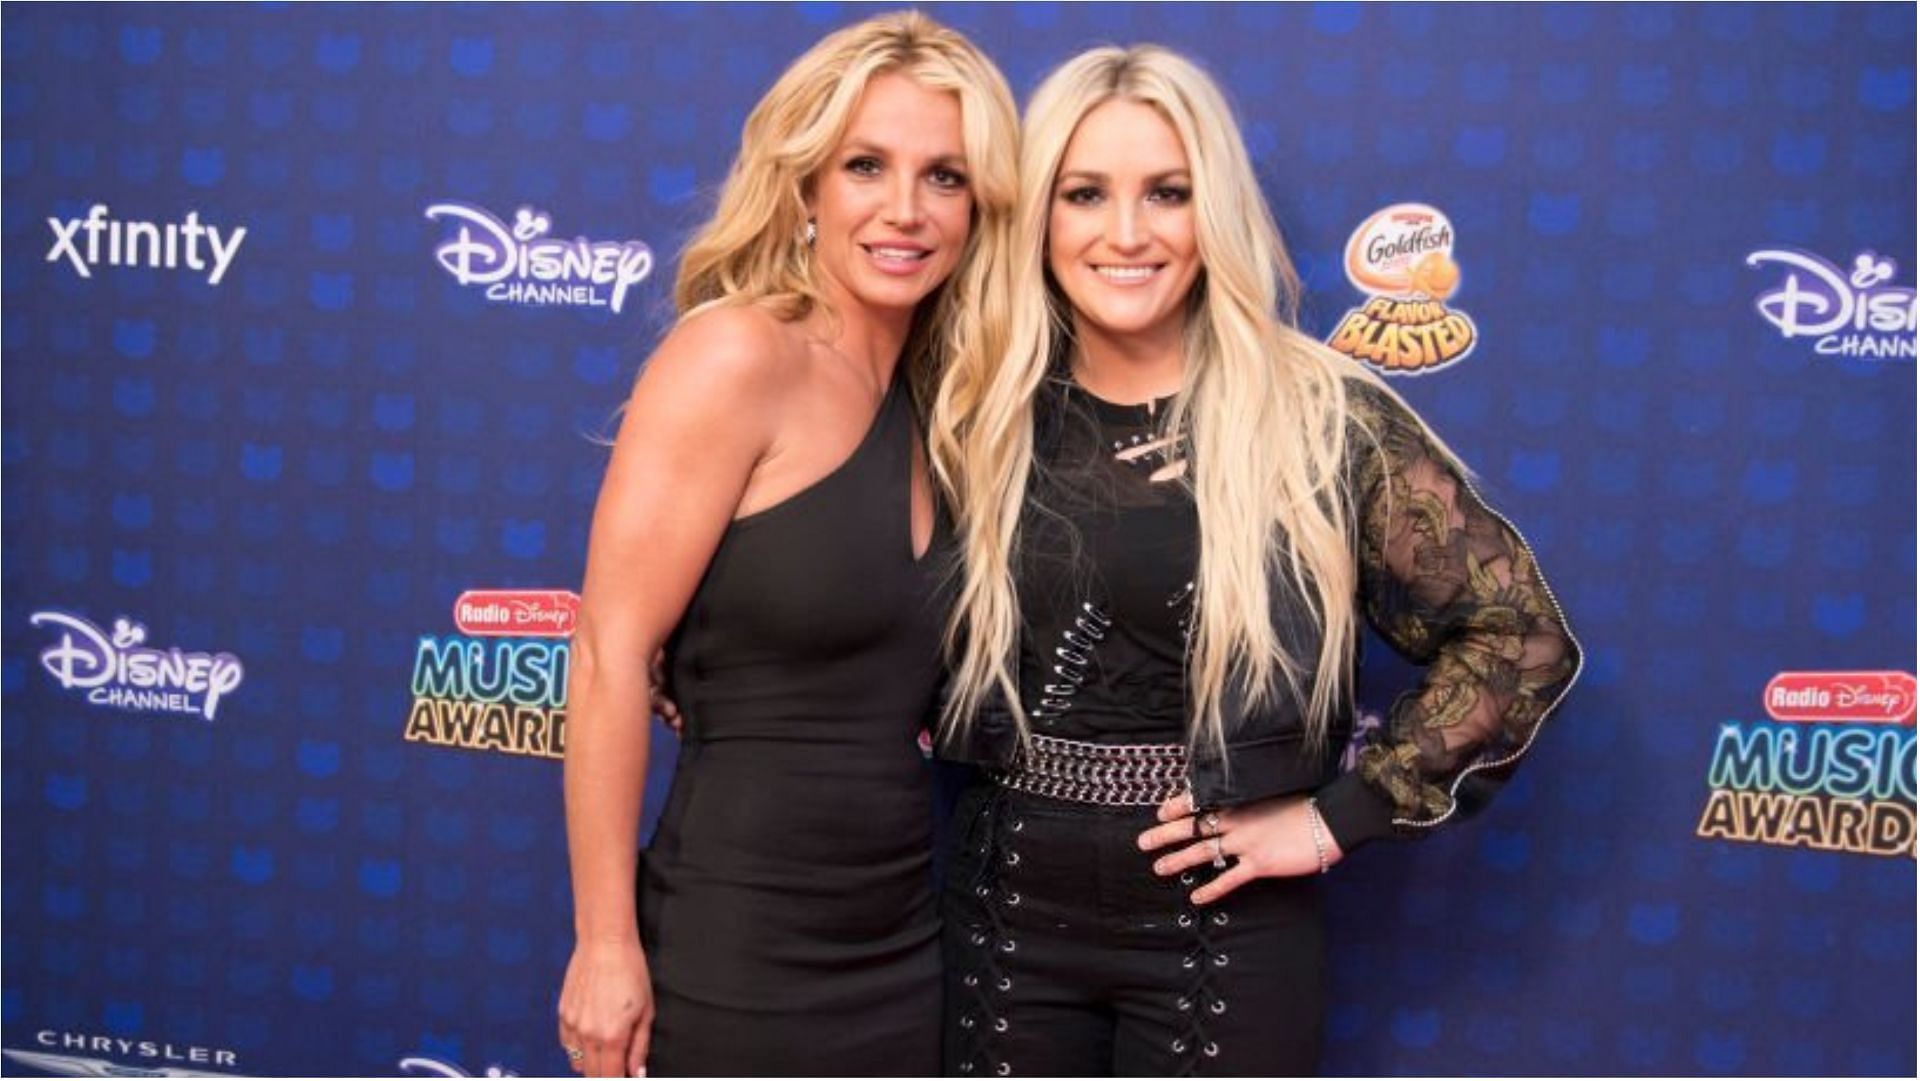 Britney Spears frequently accused Jamie Lynn of supporting her conservatorship (image via Group LA/Disney Channel/Getty Images)